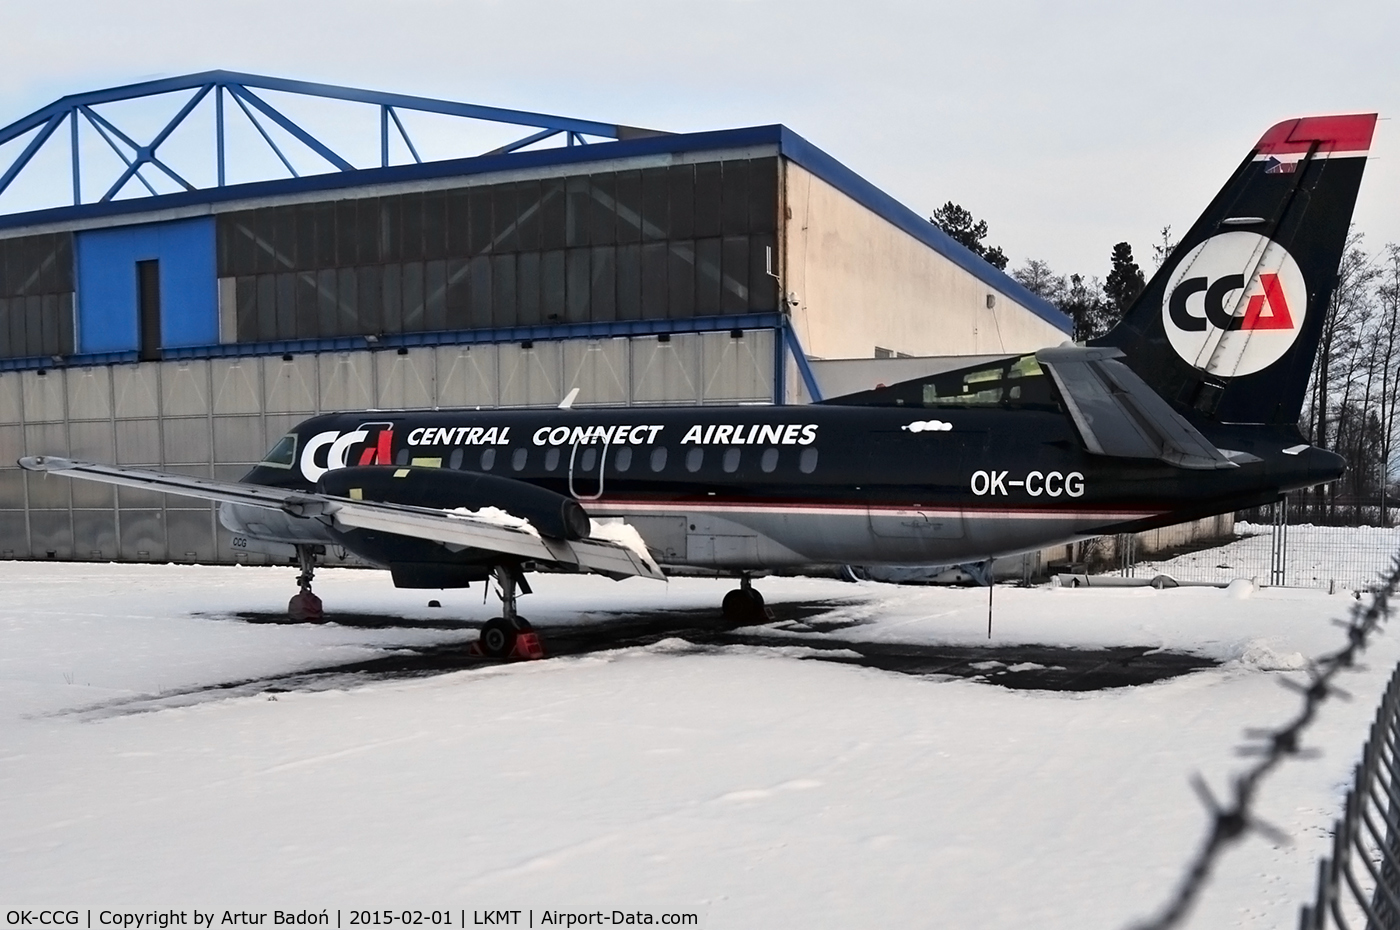 OK-CCG, 1988 Saab 340A C/N 340A-104, Central Connect Airlines